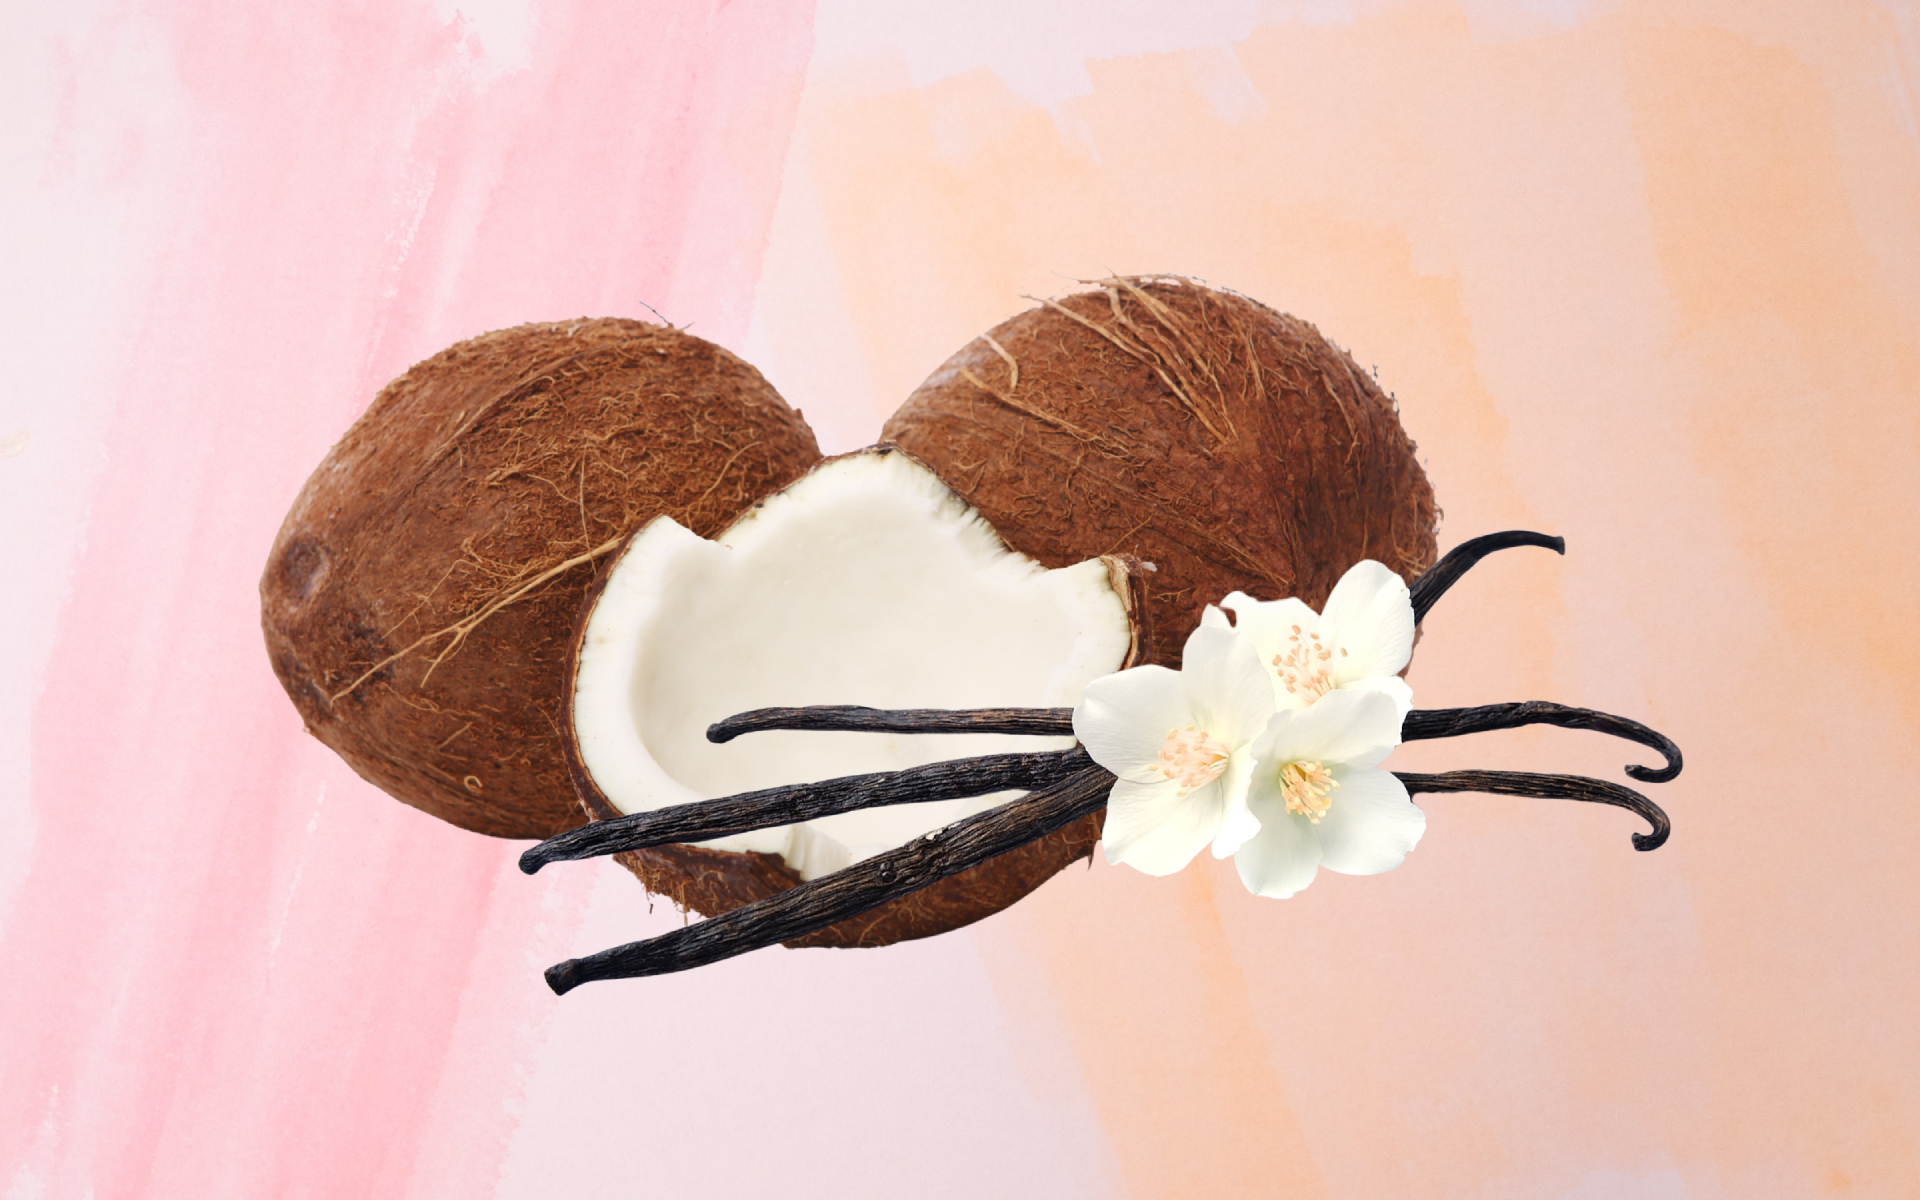 Does coconut and vanilla smell good together?